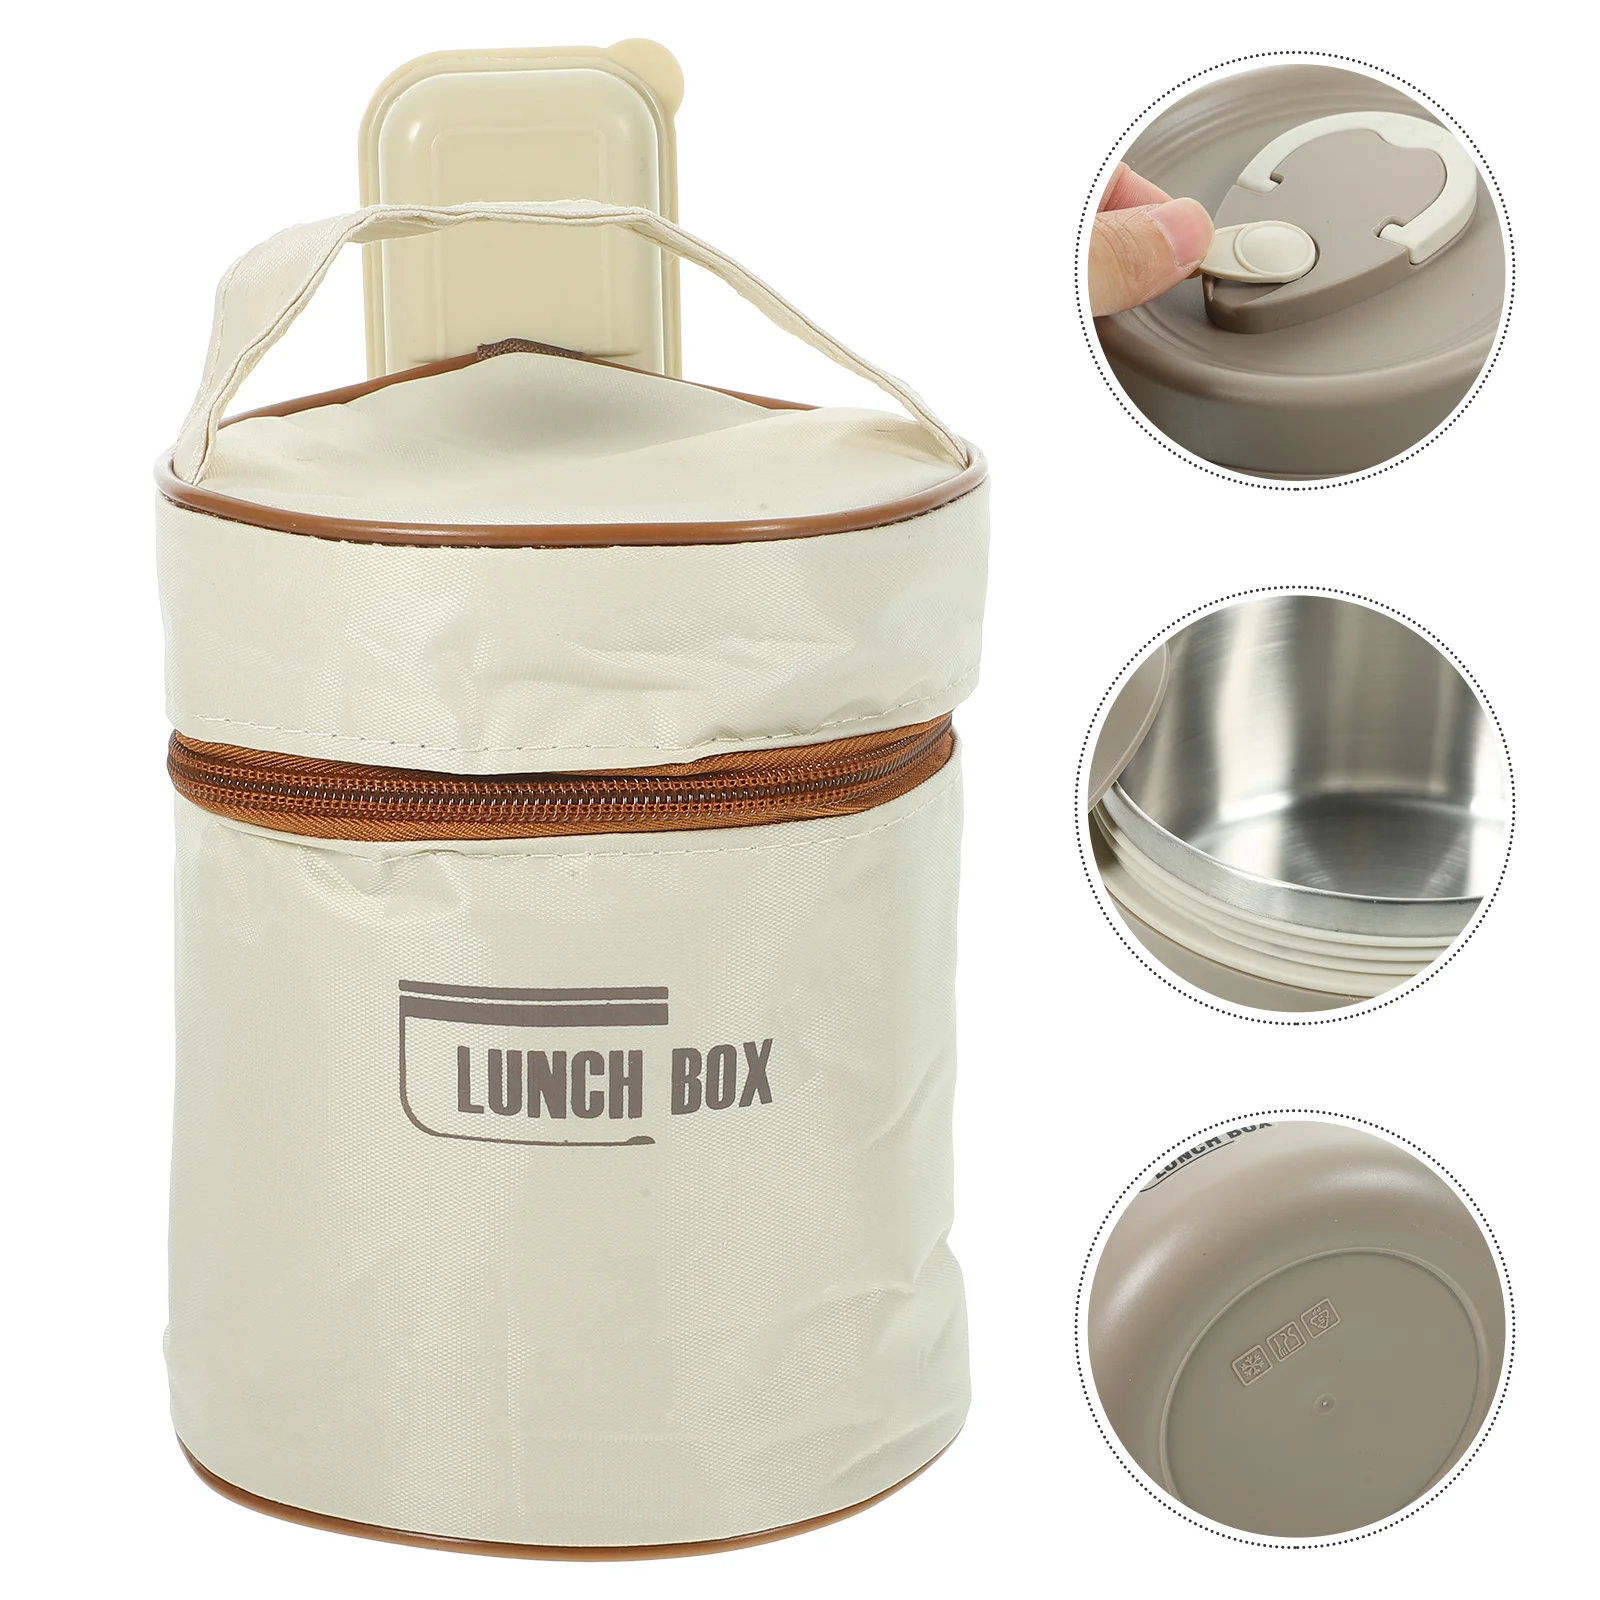 

Food Bowl Lunch Box Insulated Serving with Lid Round Container Ramen Soup Bowls Lids Noddle Student